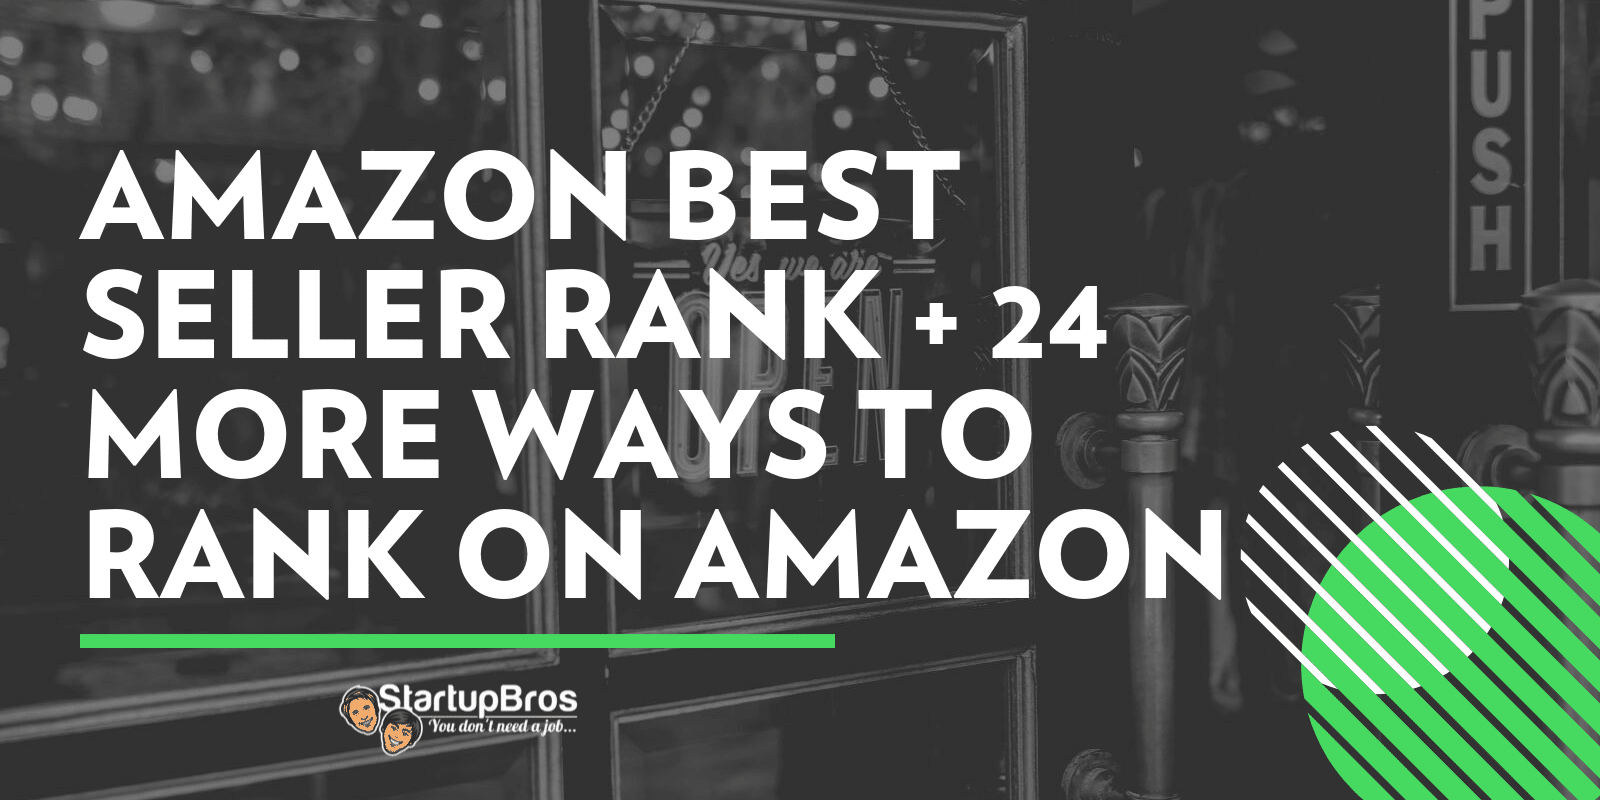 Amazon Best Sellers Rank BSR and 24 More Ways to Rank on Amazon